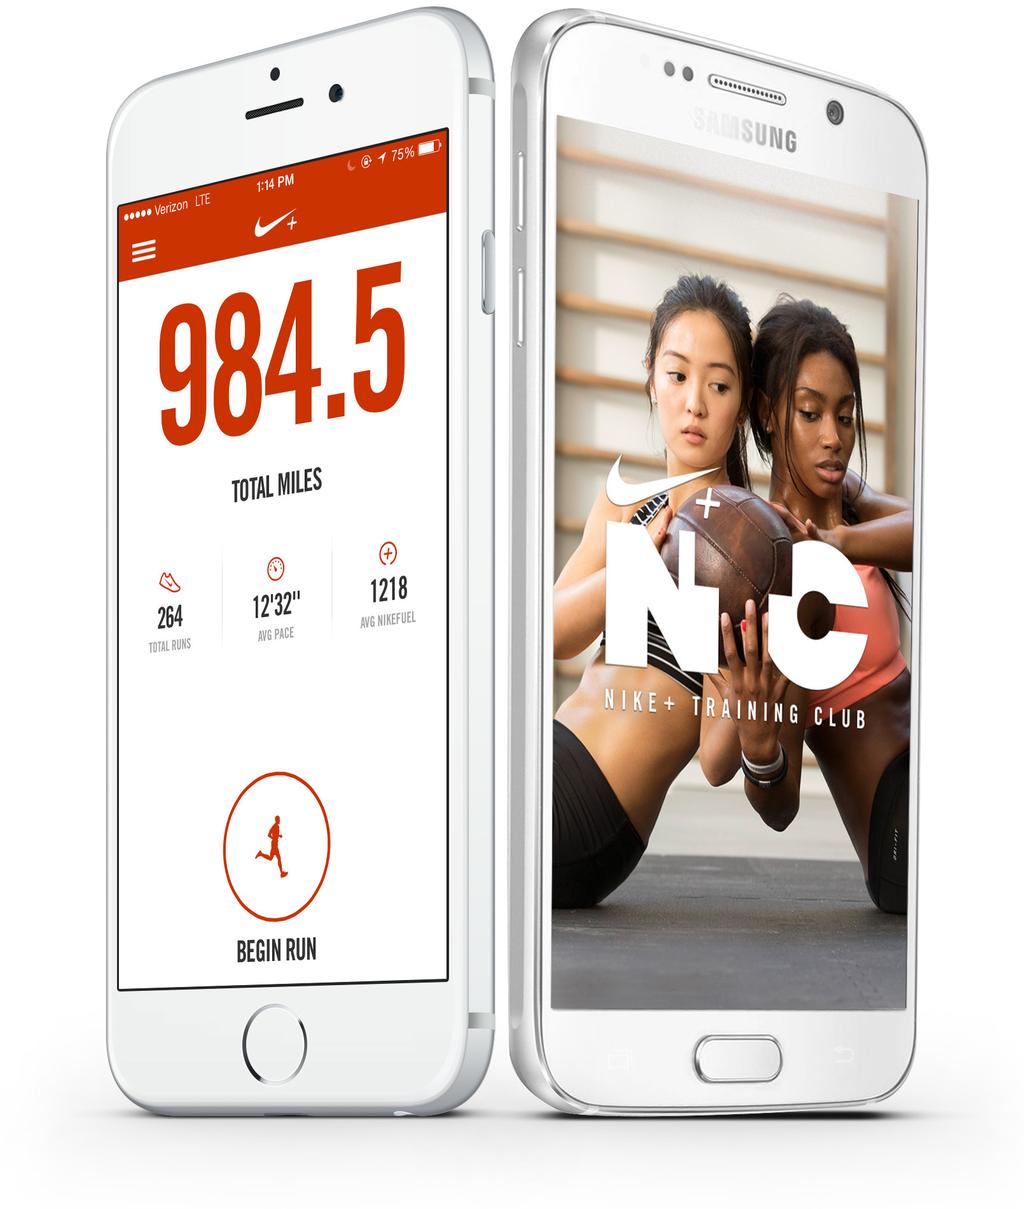 RUN SMARTER. TRAIN BETTER. NIKE+ RUNNING APP COME RUN WITH US. N+TC APP YOUR PERSONAL TRAINER. DESIGNED BY NIKE. POWERED BY FRIENDS. Crush your training with the Nike+ Running App.